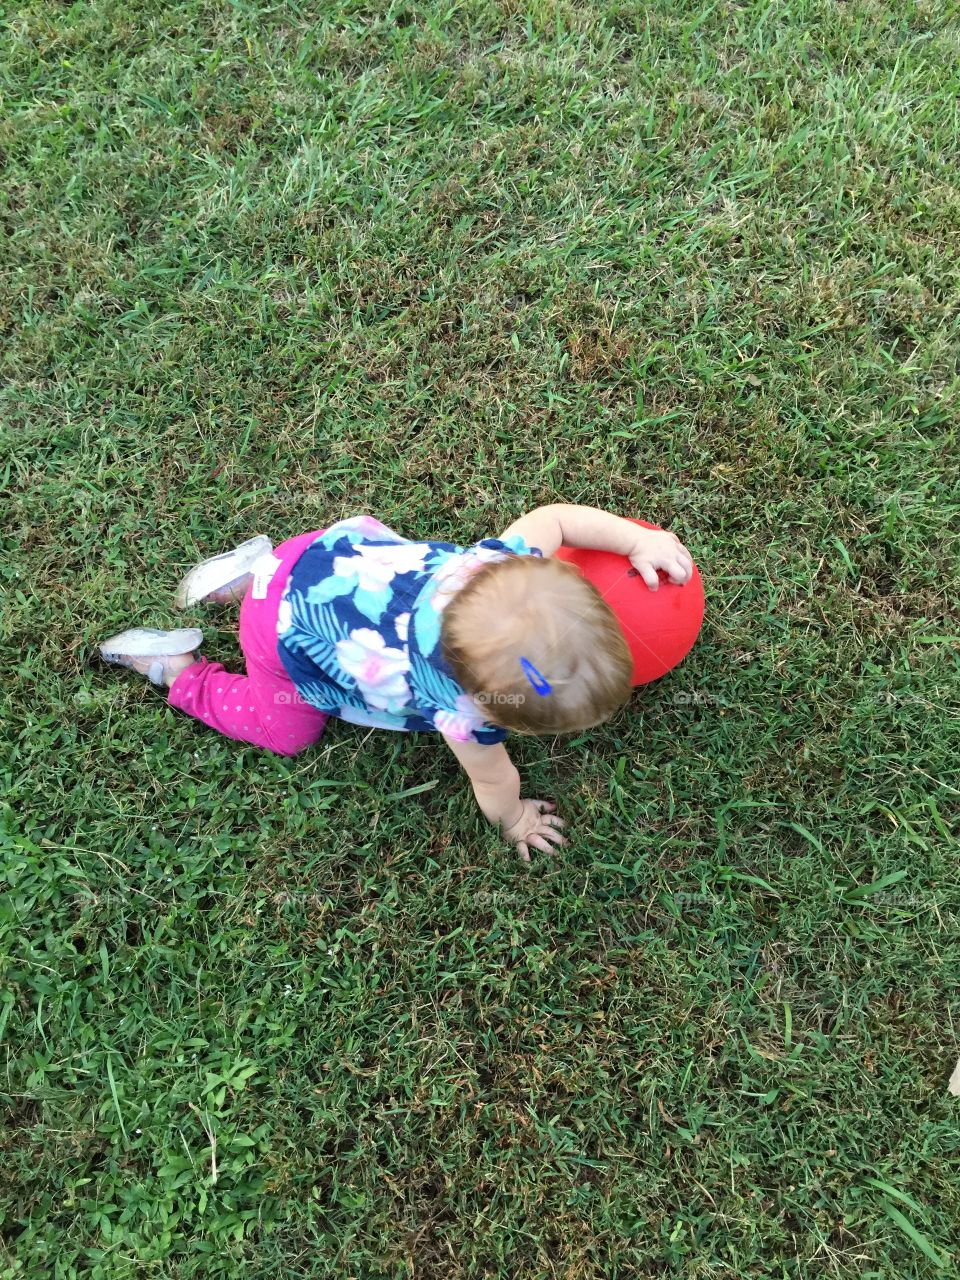 10 month old baby girl enjoying the first fall day of 2018. Baby running and chasing a ball.